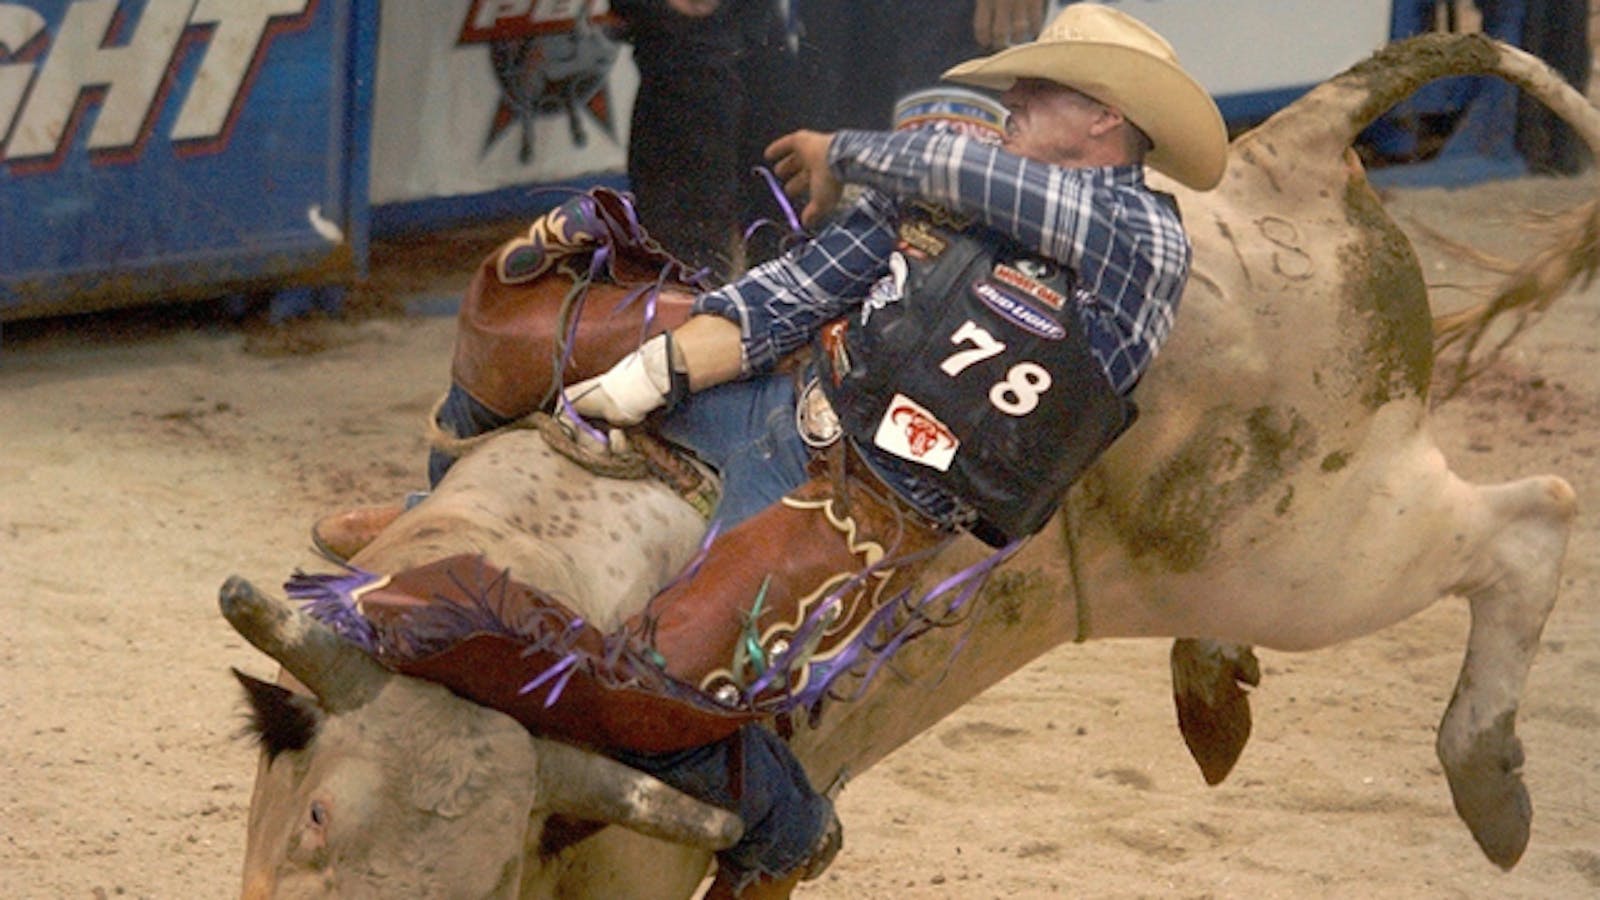 A bullrider during a Professional Bull Riders event. Endeavor now owns the Professional Bull Riders. Photo by AP.